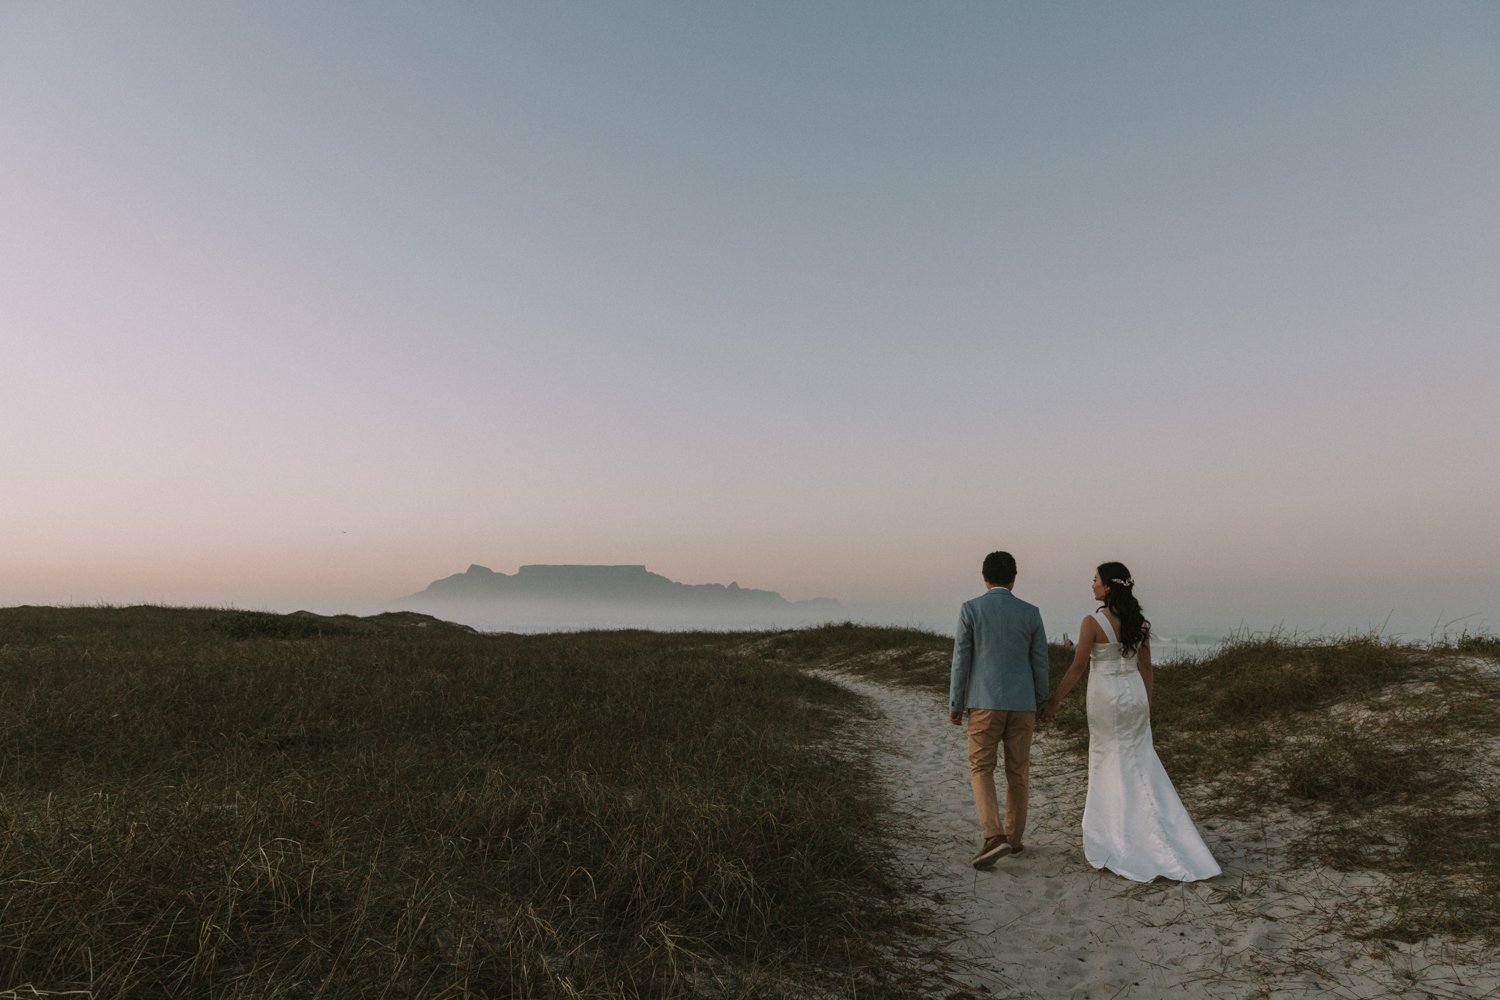 Wedding Shoot in Cape Town - Bianca Asher Photography-1.jpg